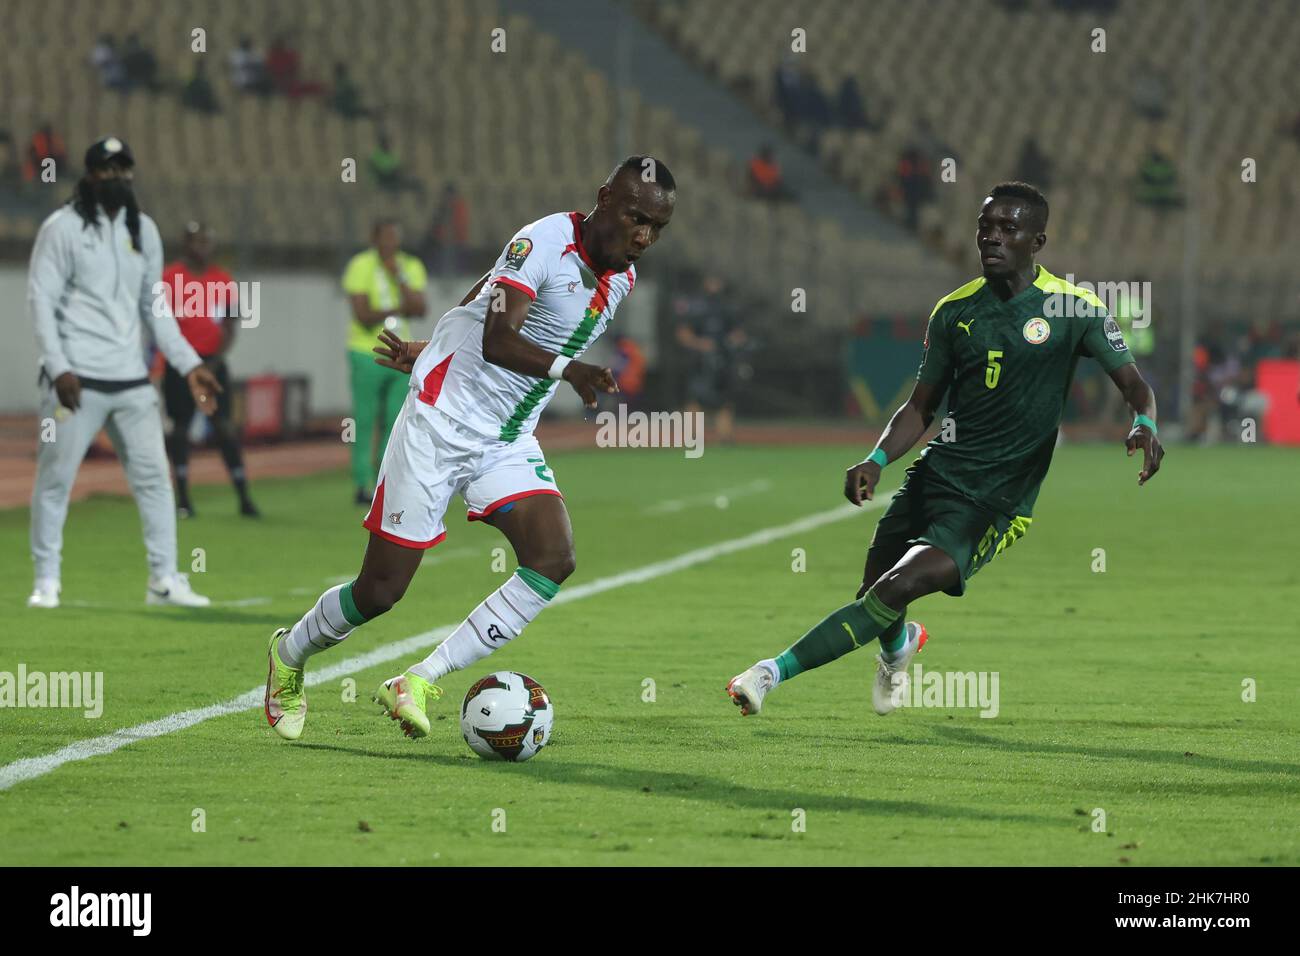 CAMEROON, Yaounde, 02 February 2022 - Idrissa Gueye of Senegal during the Africa Cup of Nations play offs semi final match between Burkina Faso and Senegal at Stade Ahmadou Ahidjo,Yaounde, Cameroon, 02/02/2022/ Photo by SF Stock Photo